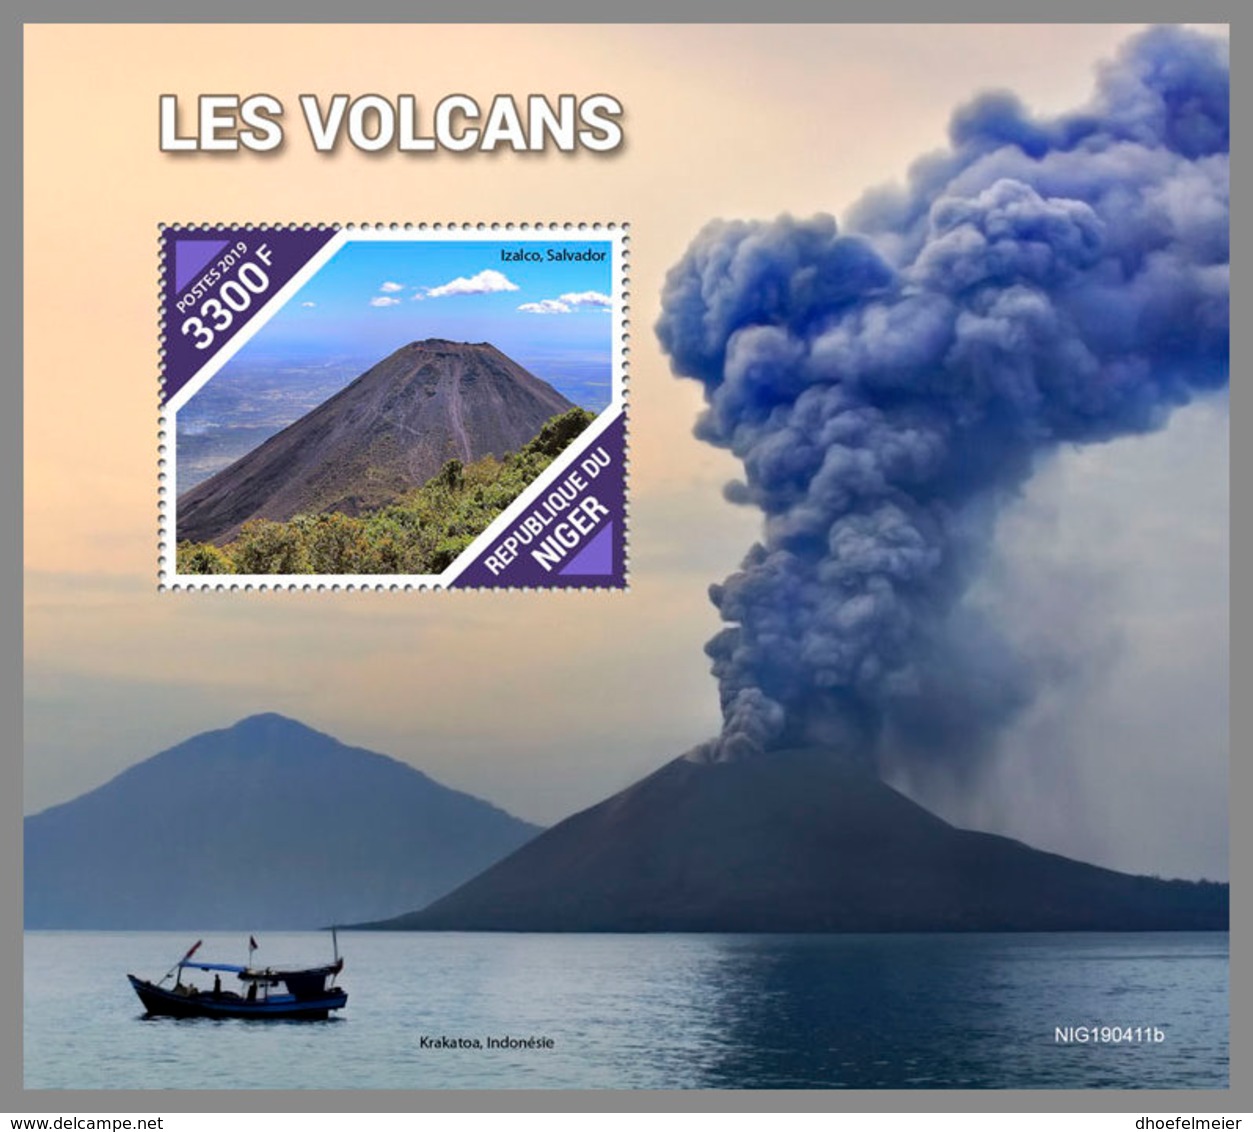 NIGER 2019 MNH Volcanoes Vilkane Volcans S/S - OFFICIAL ISSUE - DH1939 - Volcanos